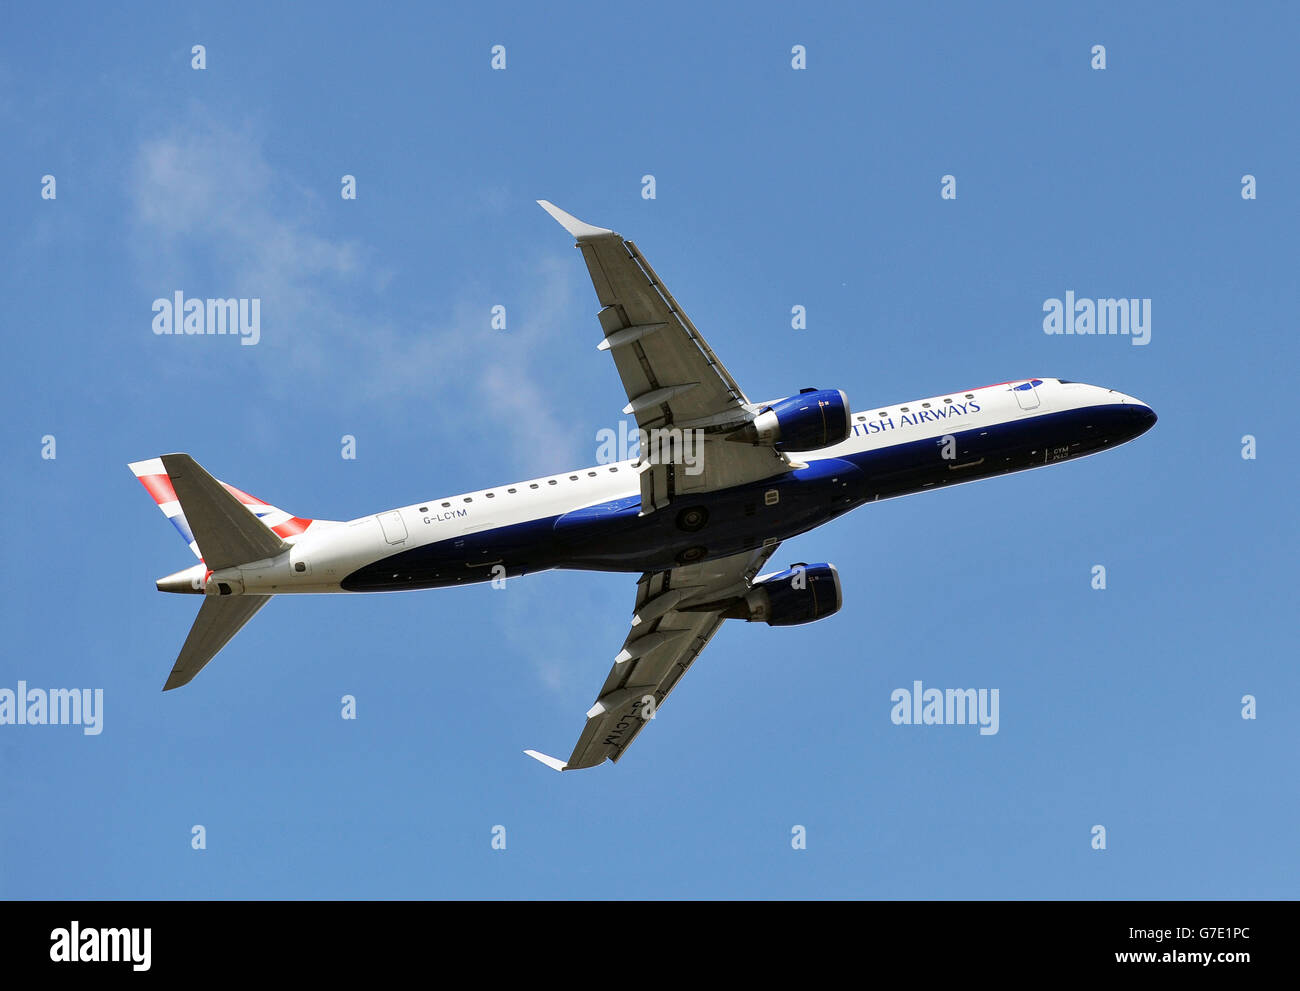 British Airways stock - London. A British Airways (BA CityFlyer) Embraer EMB-190 jet, takes off from London City Airport in east London. Stock Photo